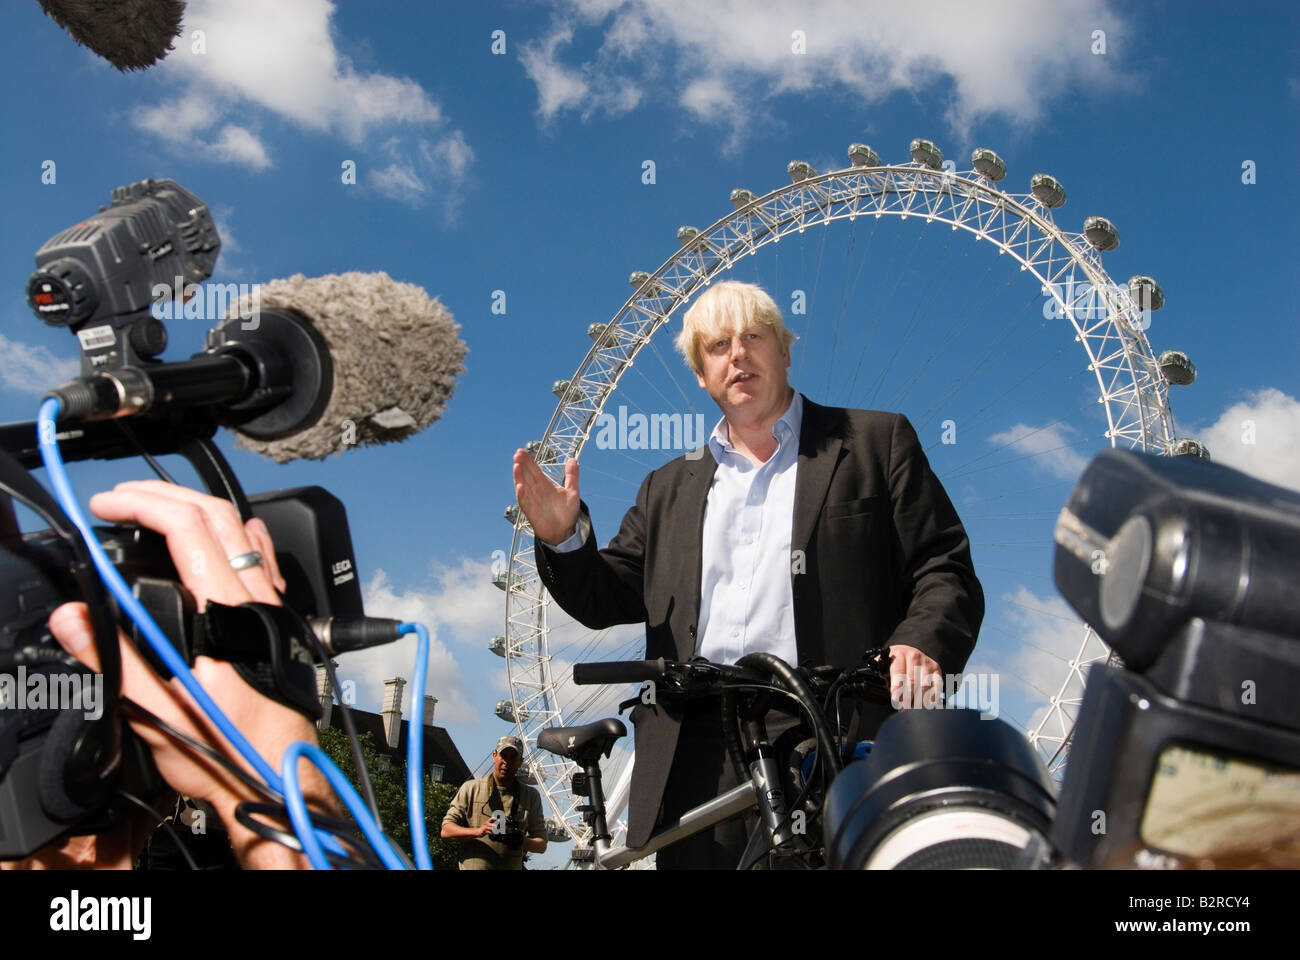 Mayor of London Boris Johnson at the launch of the London Cycling Campaign Stock Photo